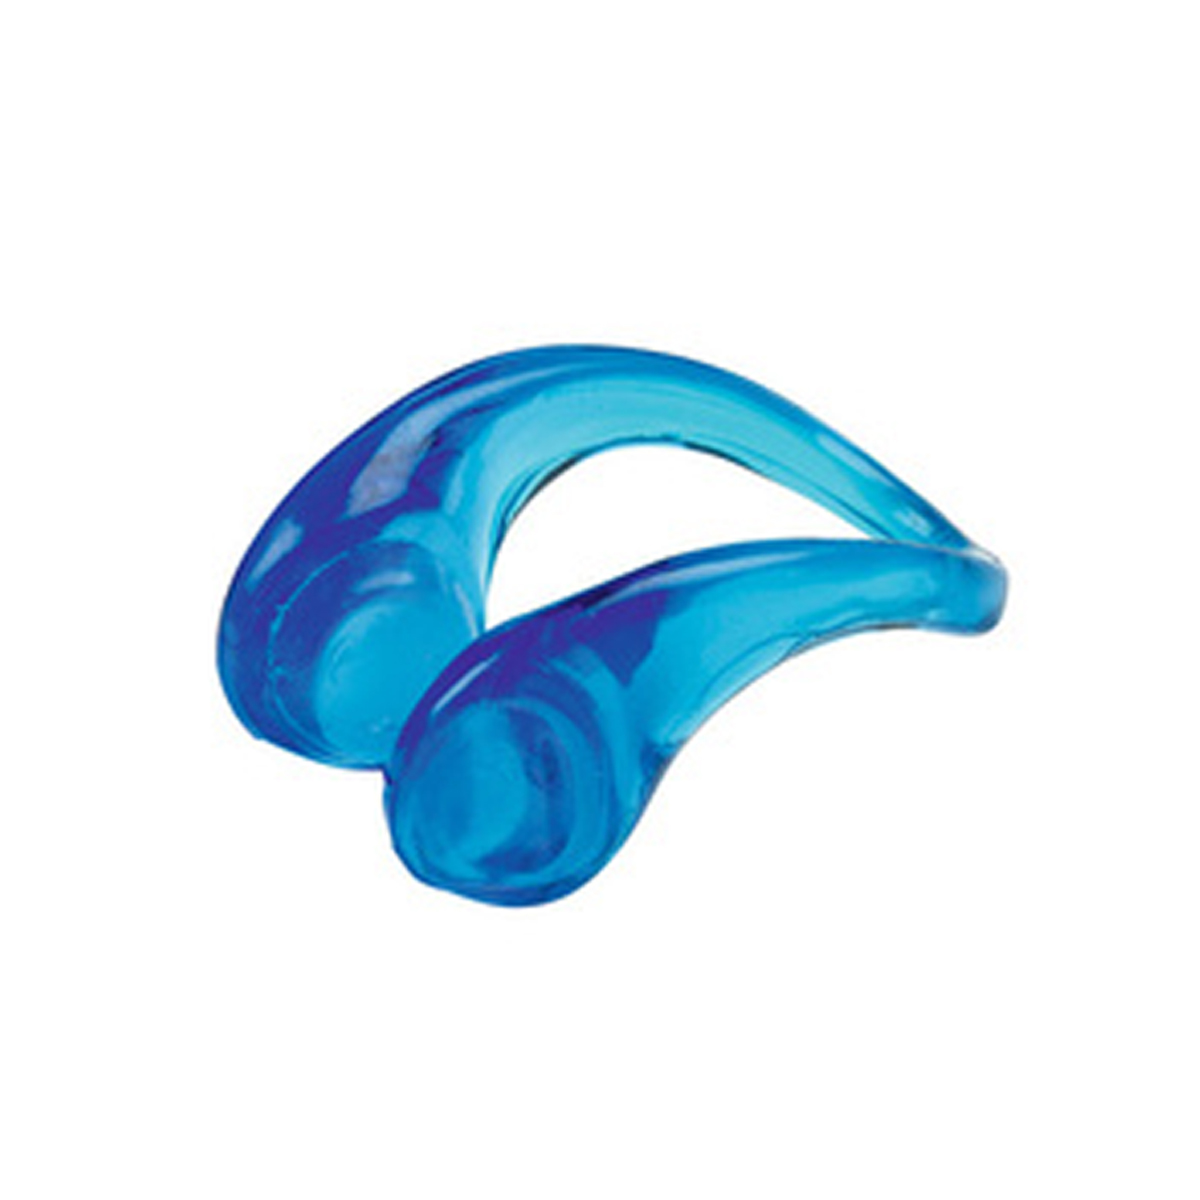 5 Swimming Colored Nose Clip with Transparent Case Kids Adult Swim Nose Plug 